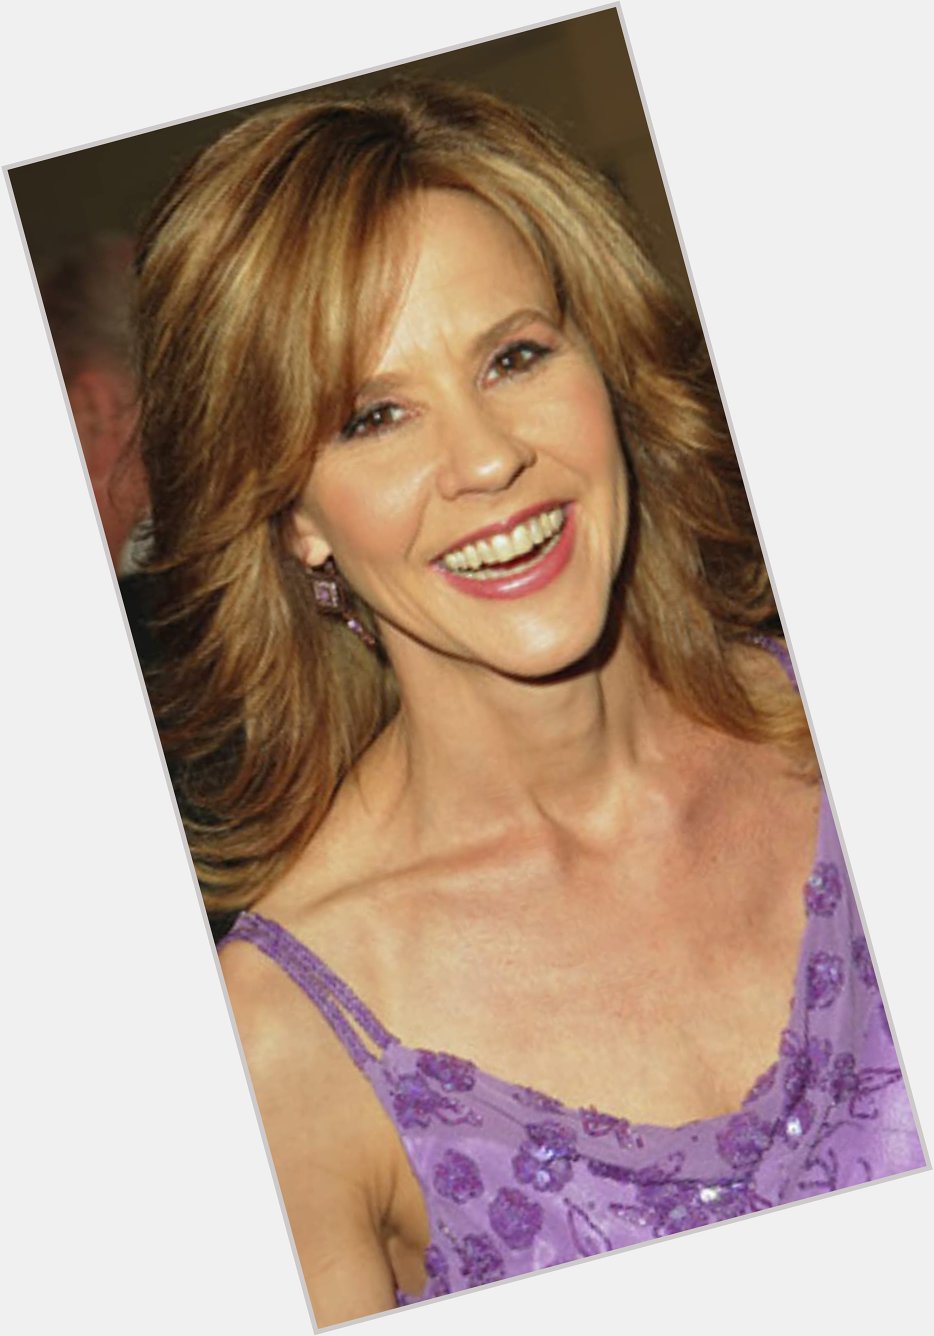 Happy birthday to Linda Blair! She s known for her roles in The Exorcist, Hell Night, and Summer of Fear. 